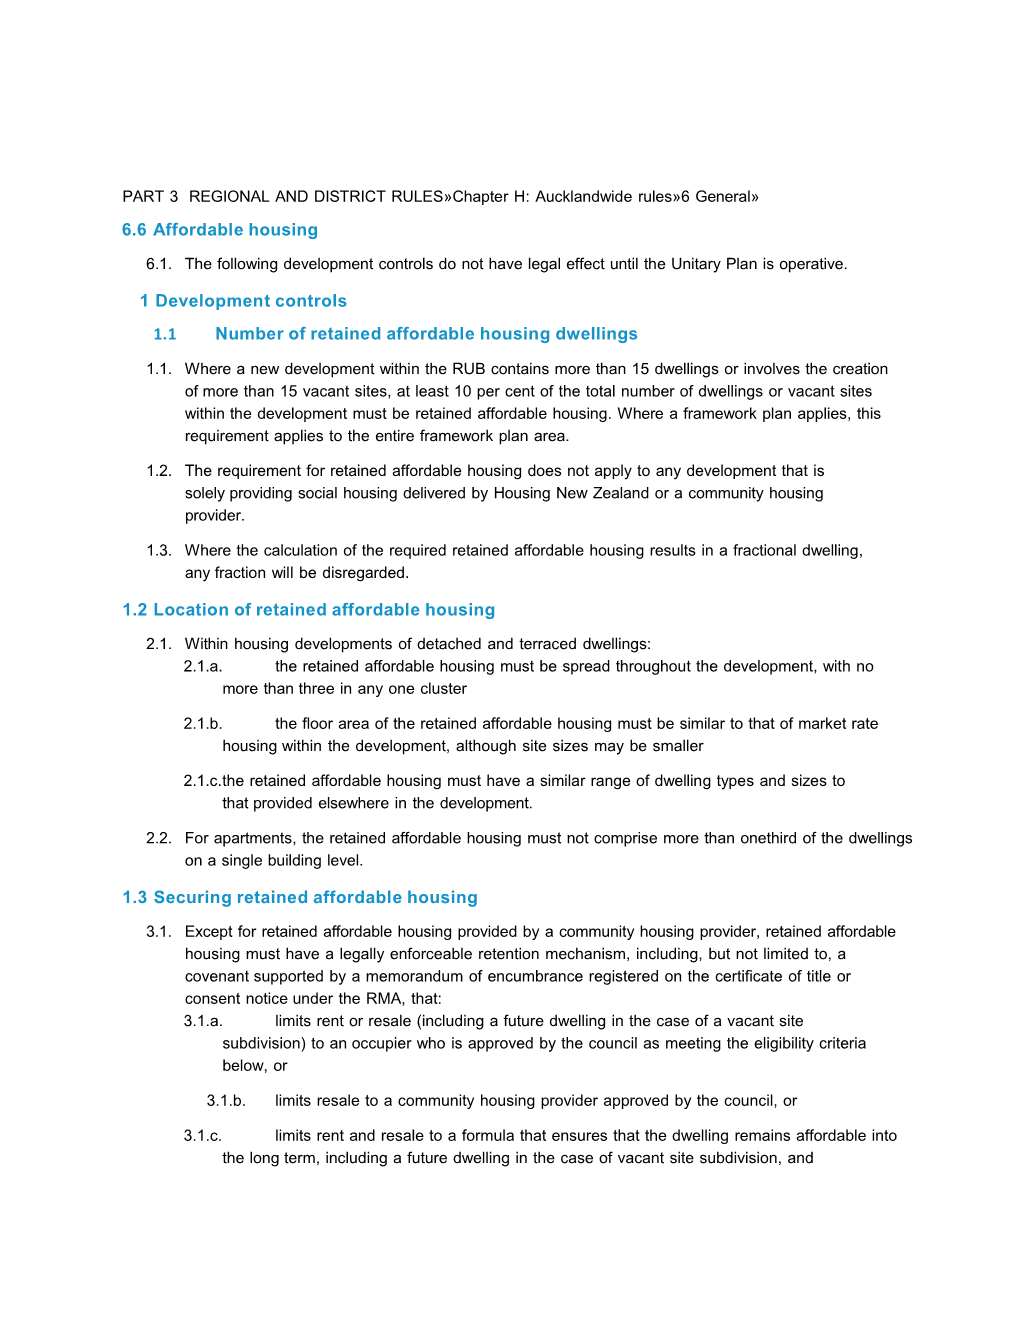 The Proposed Auckland Unitary Plan - Chapter H6.6: Affordable Housing